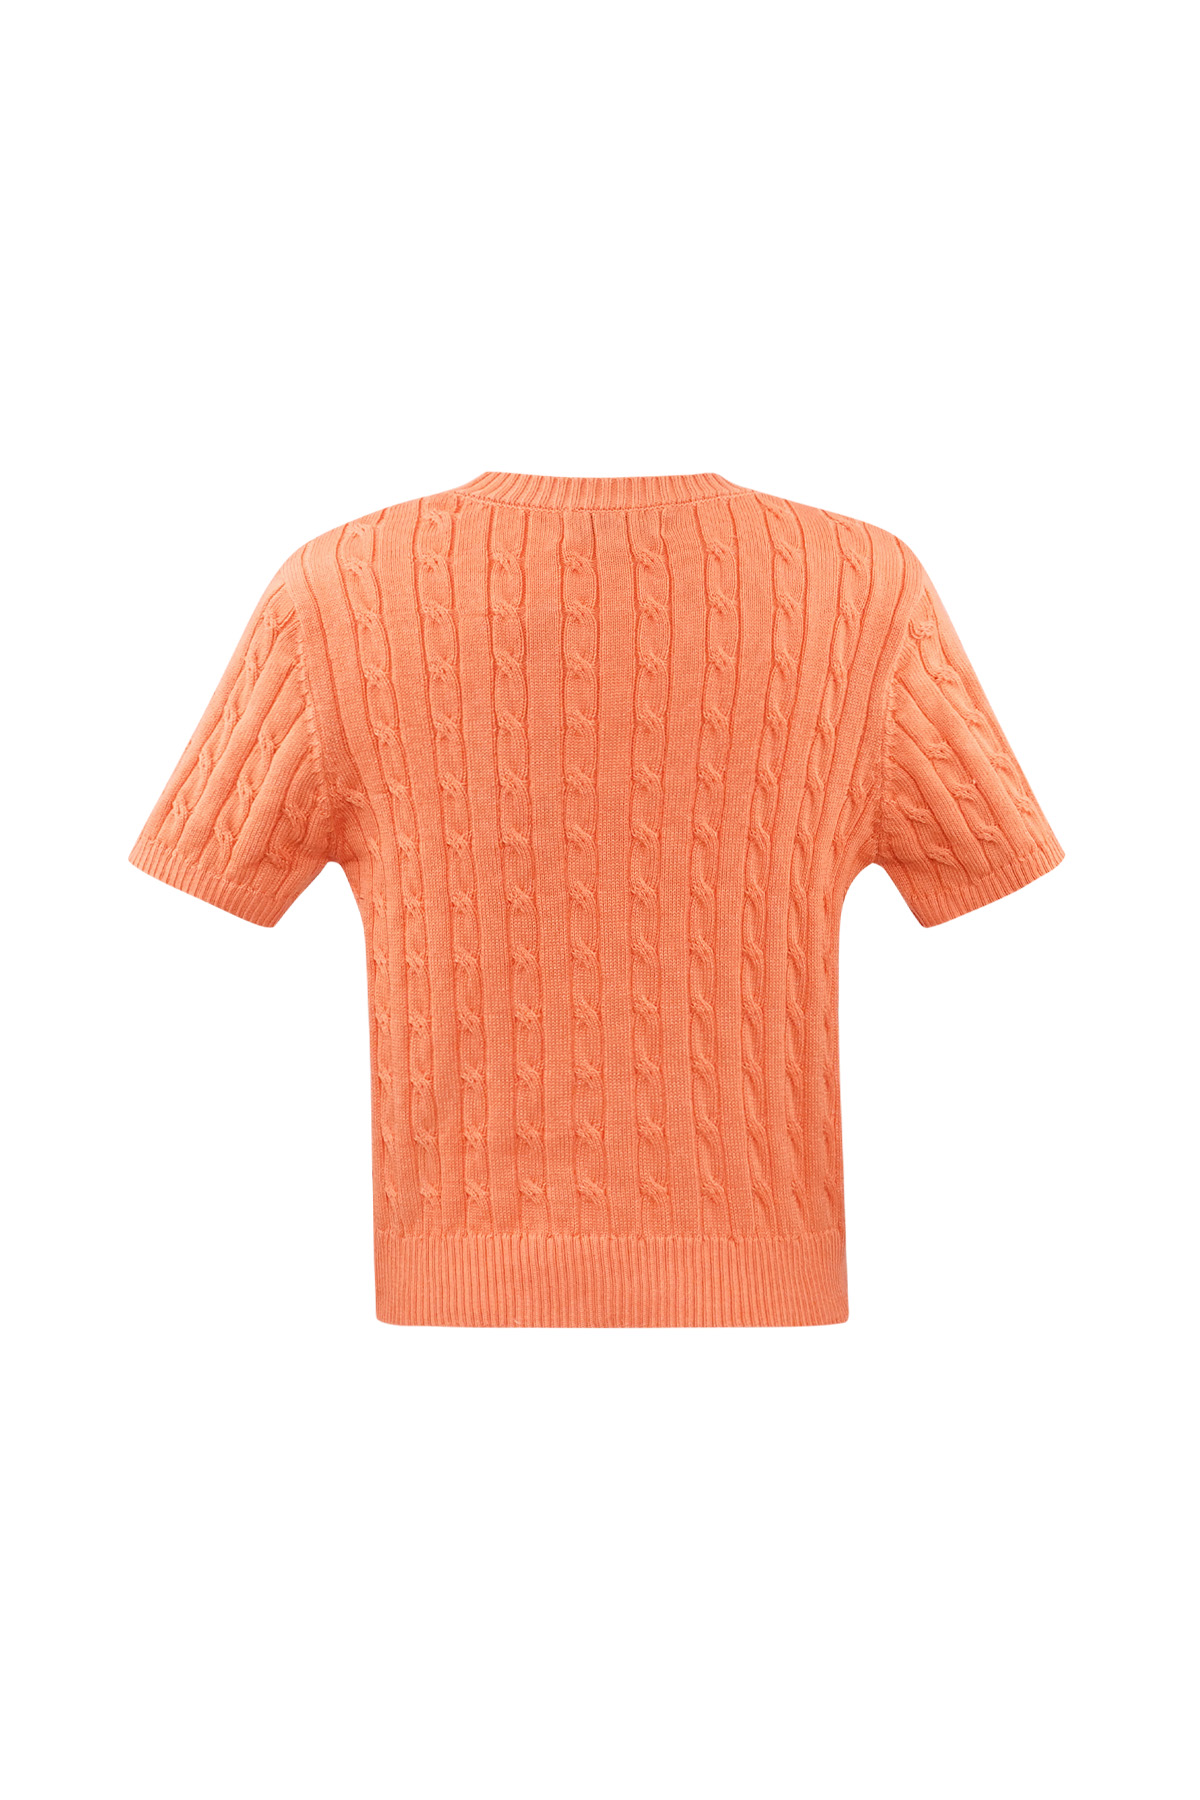 Knitted sweater with cables and short sleeves large/extra large – orange Picture7